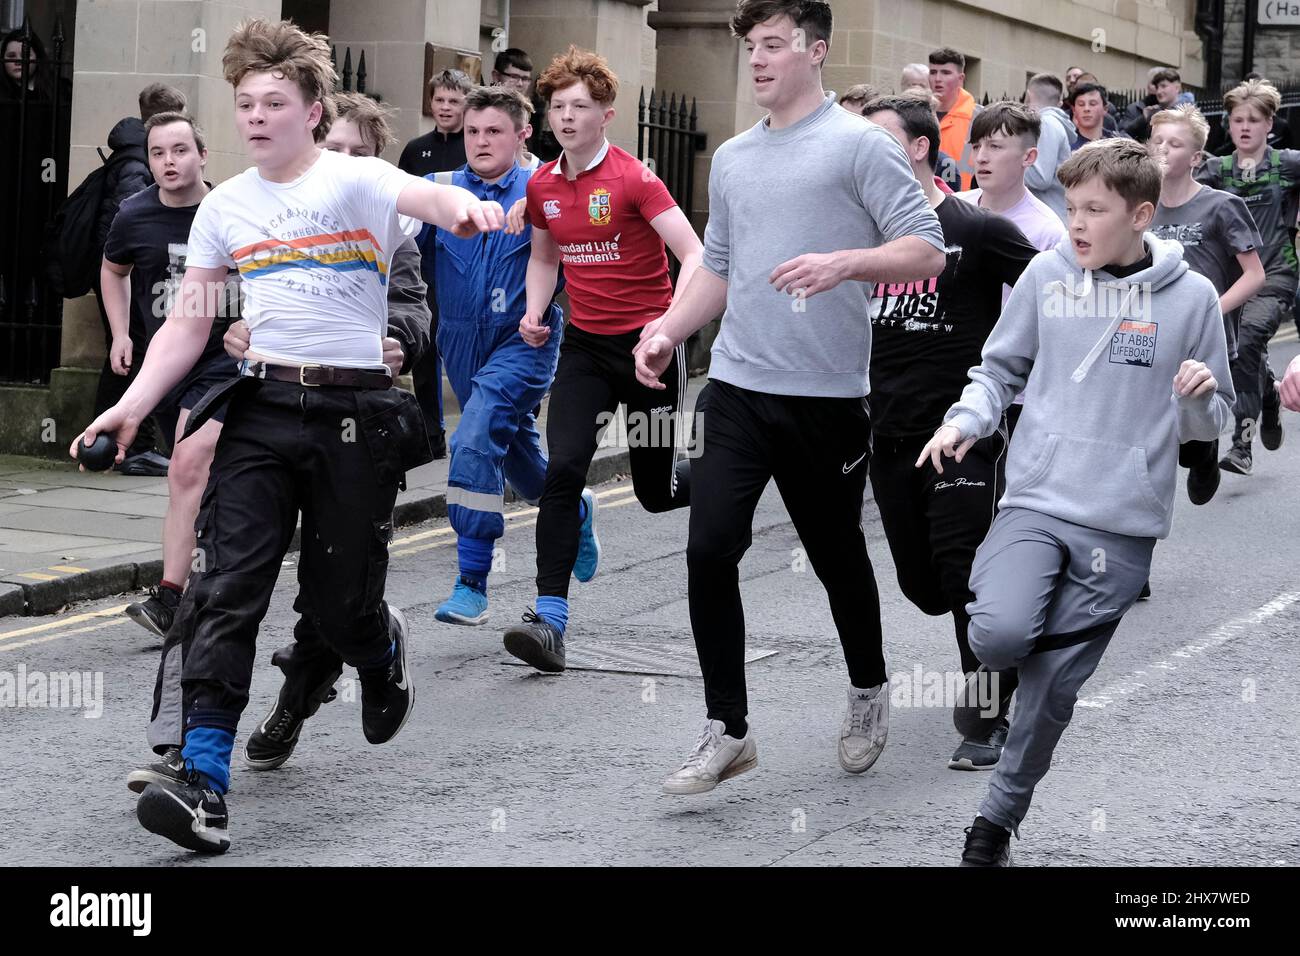 Jedburgh, Thursday 10 March 2022. An unidentified youth with 'Ba' in hand is challenged by others for the 'Schule Ba' the first to be 'hailed' at the start of the annual 'Fastern Eve Handba' event in Jedburgh's High Street in the Scottish Borders on March 10, 2022 in Jedburgh, Scotland. The annual event, which started in the 1700's, takes place today and involves two teams, the Uppies (residents from the higher part of Jedburgh) and the Doonies (residents from the lower part of Jedburgh) getting the ball to either the top or bottom of the town. The ball, which is made of leather, stuffed with Stock Photo